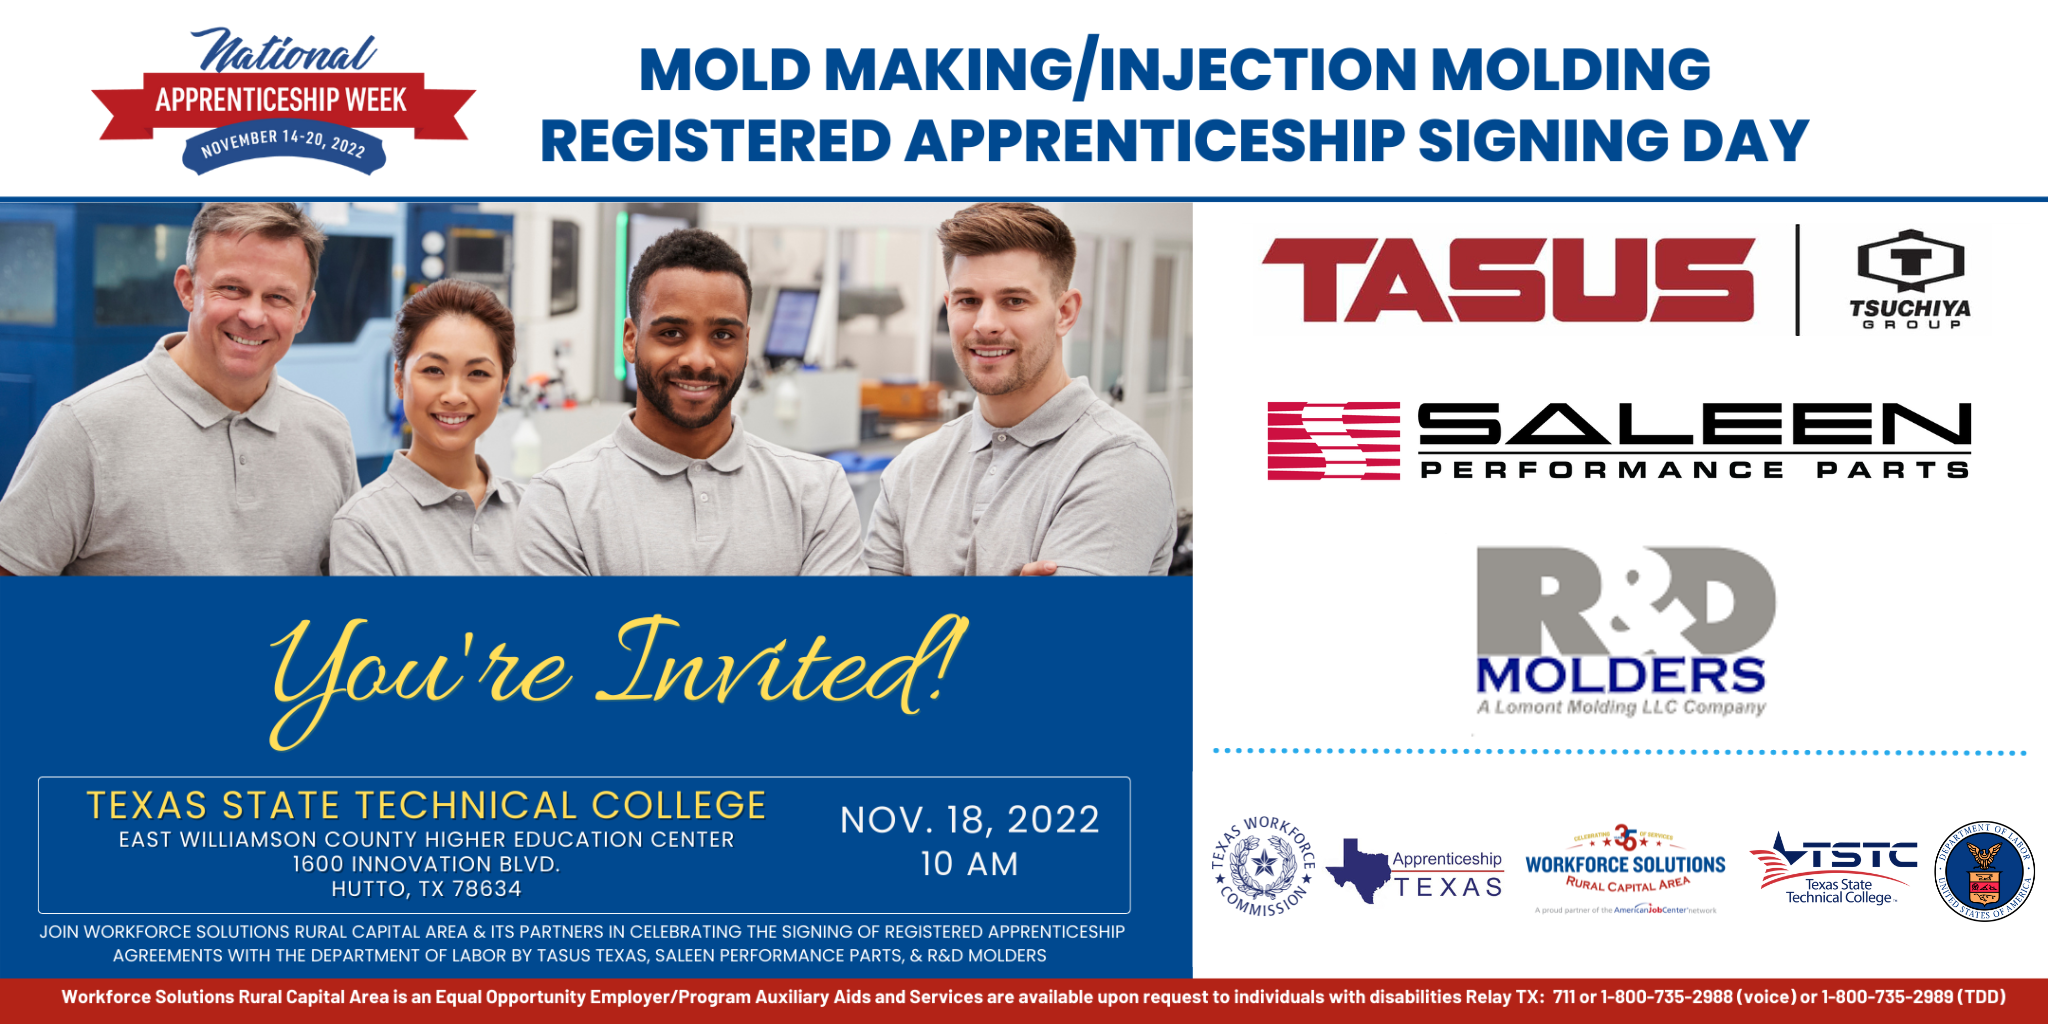 Mold Making/Injection Molding Registered Apprenticeship Signing Day